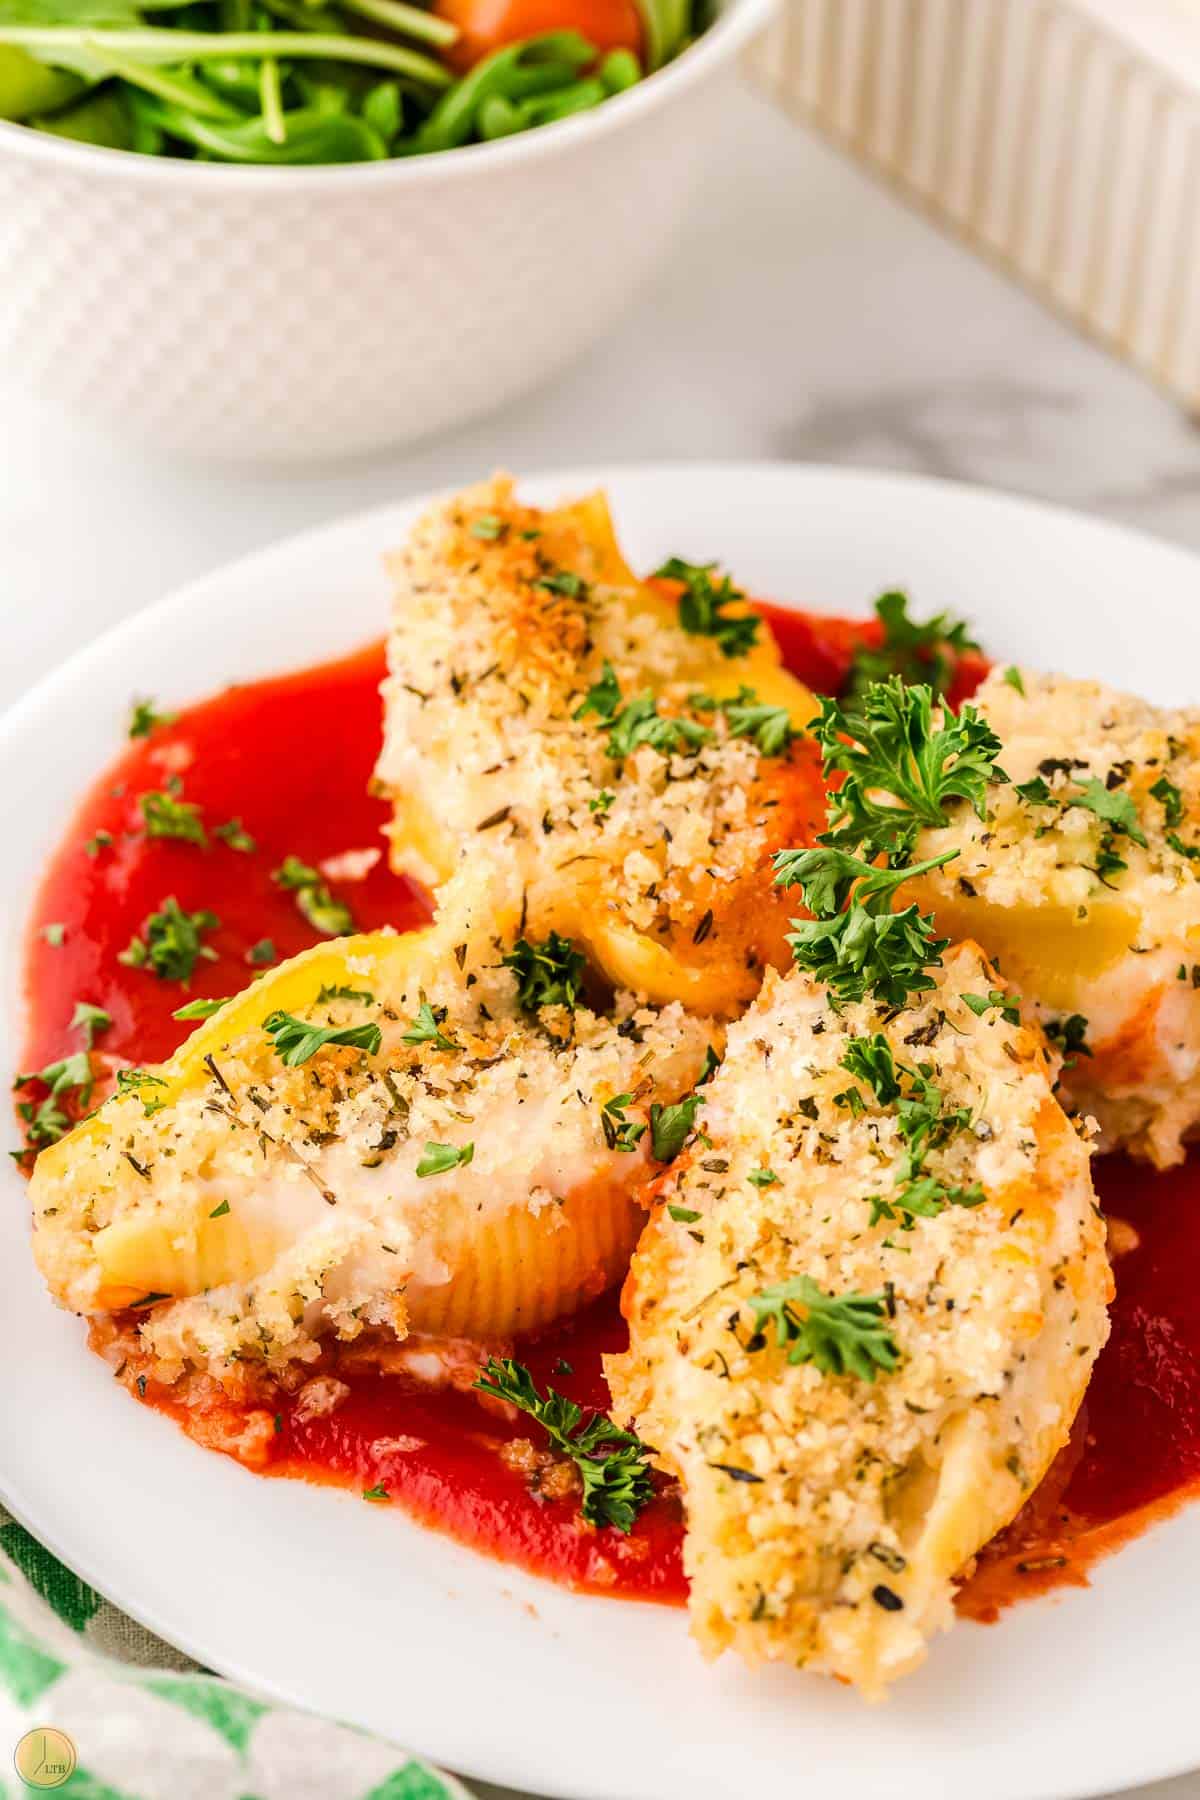 olive garden's favorite giant cheese-stuffed shells